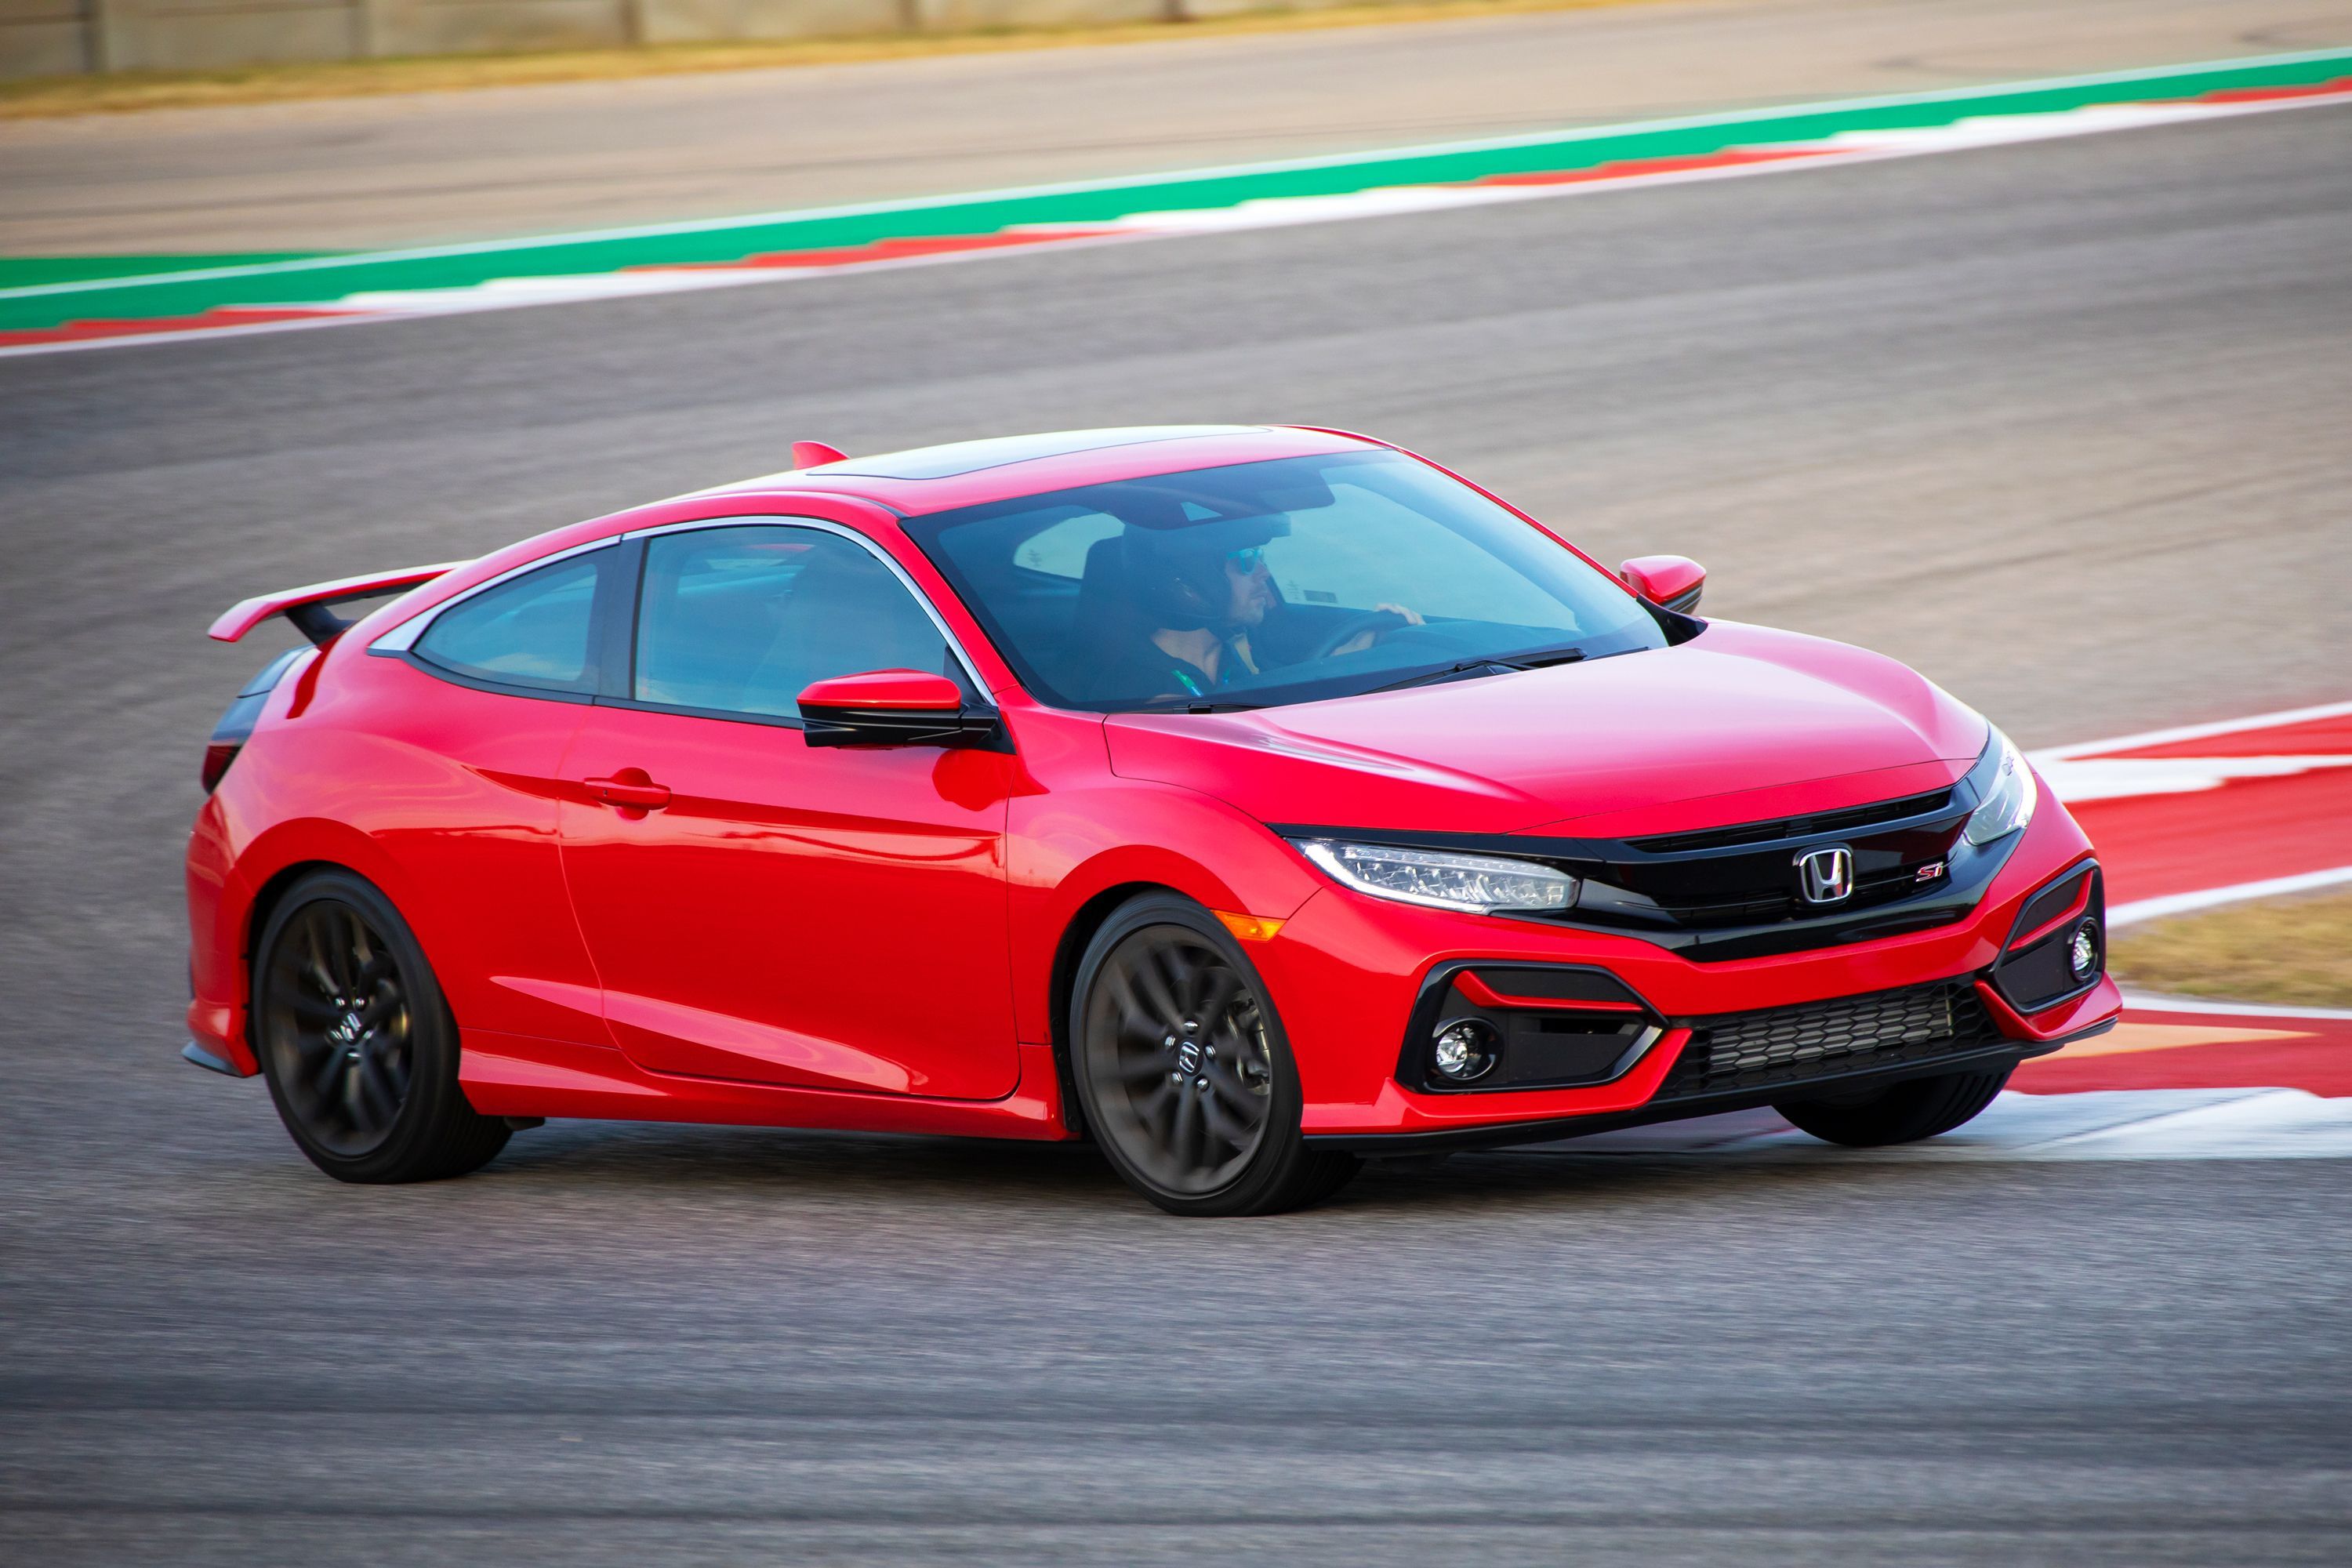 Honda Civic Coupe Si on the track